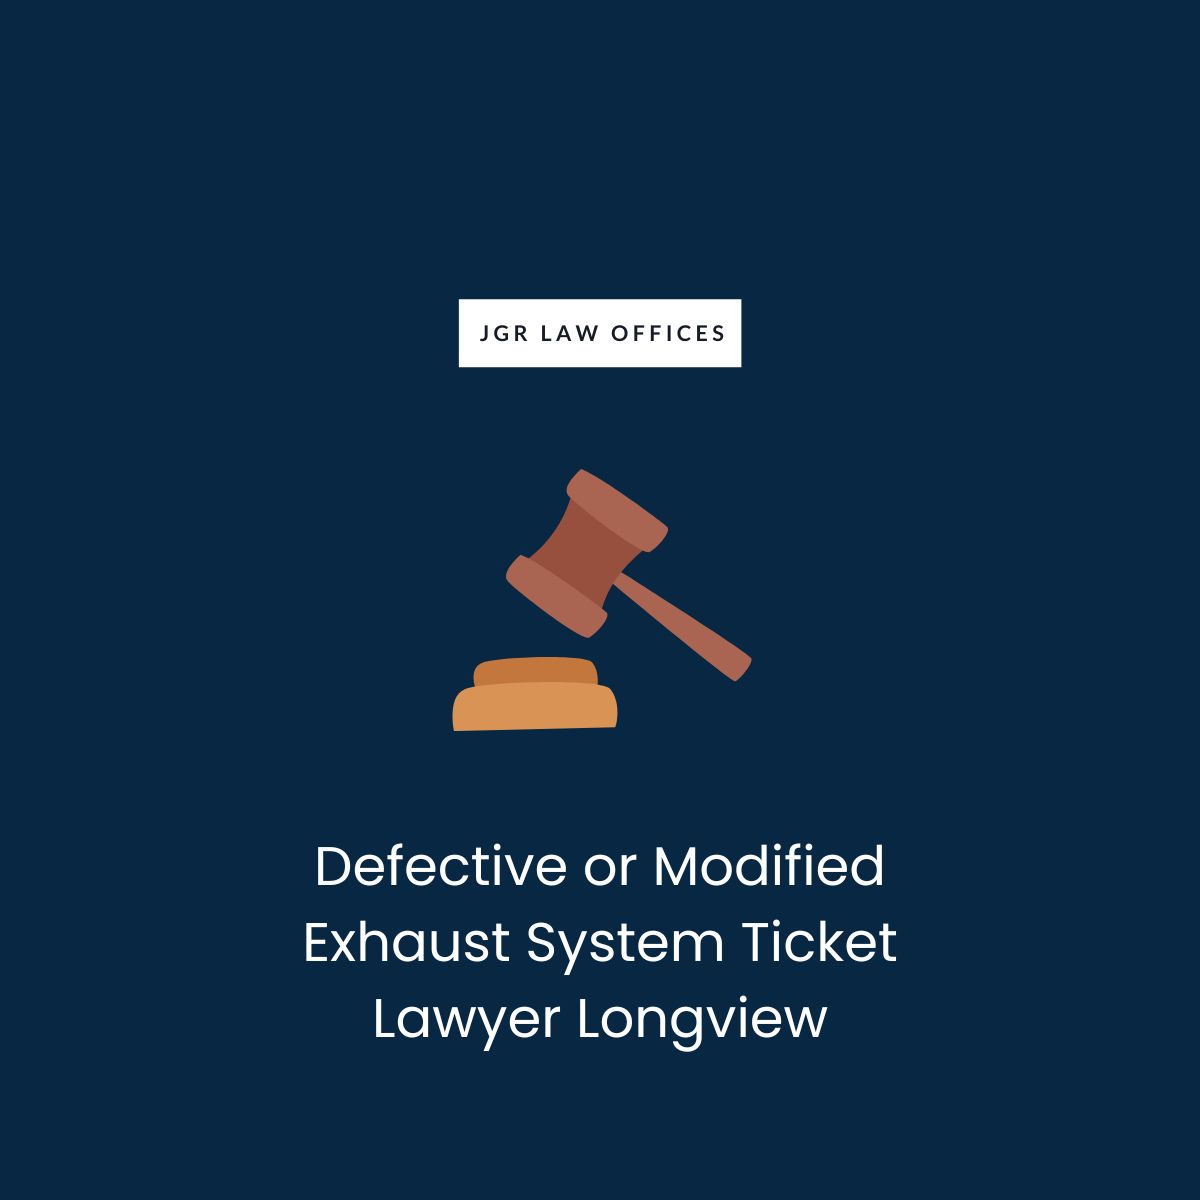 Defective or Modified Exhaust System Ticket Attorney Longview